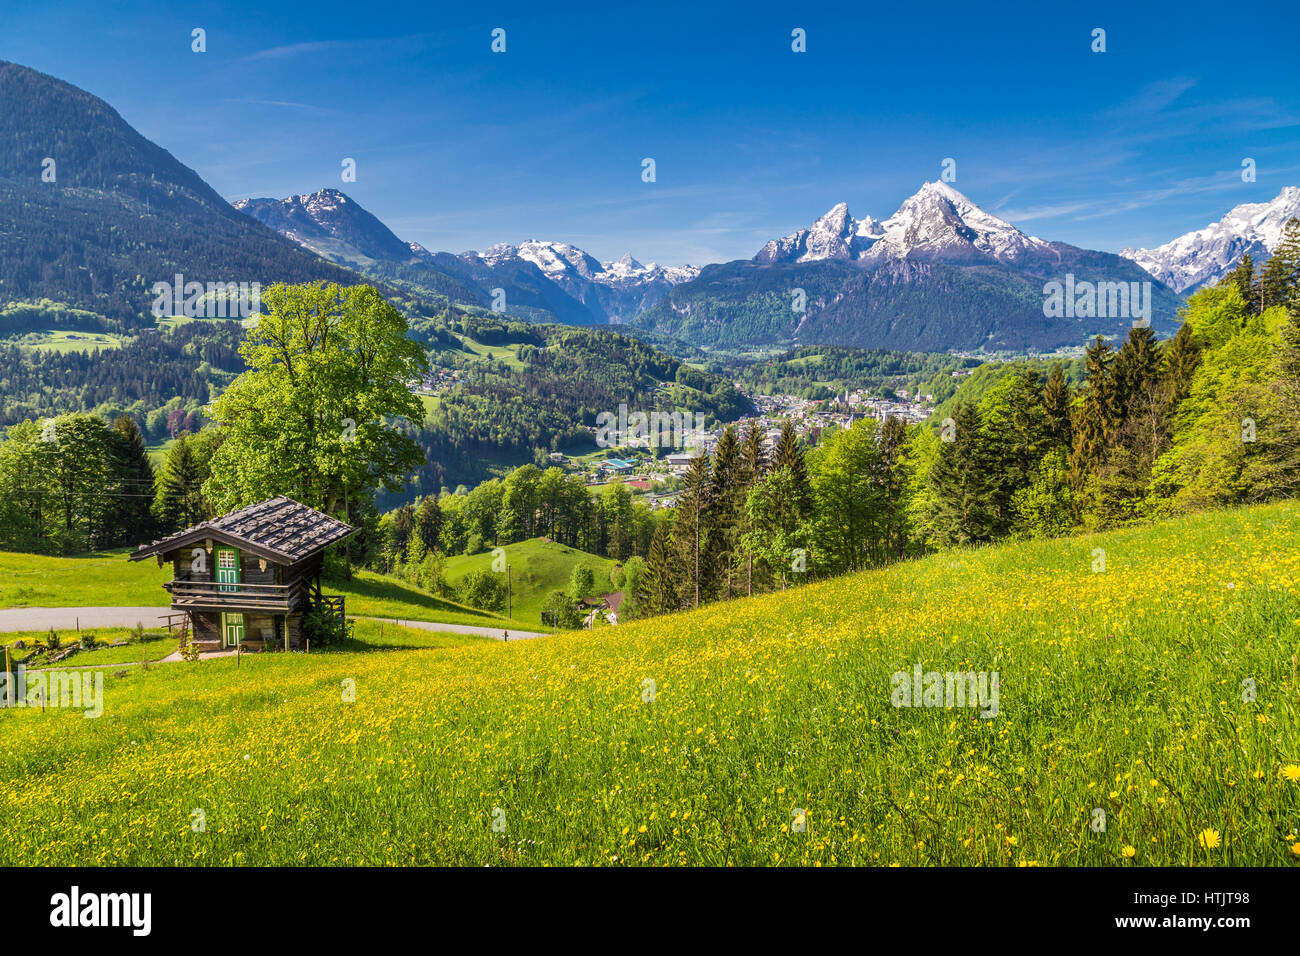 Panoramic view of idyllic mountain scenery in the Alps with traditional mountain chalet and fresh green mountain pastures with blooming flowers Stock Photo